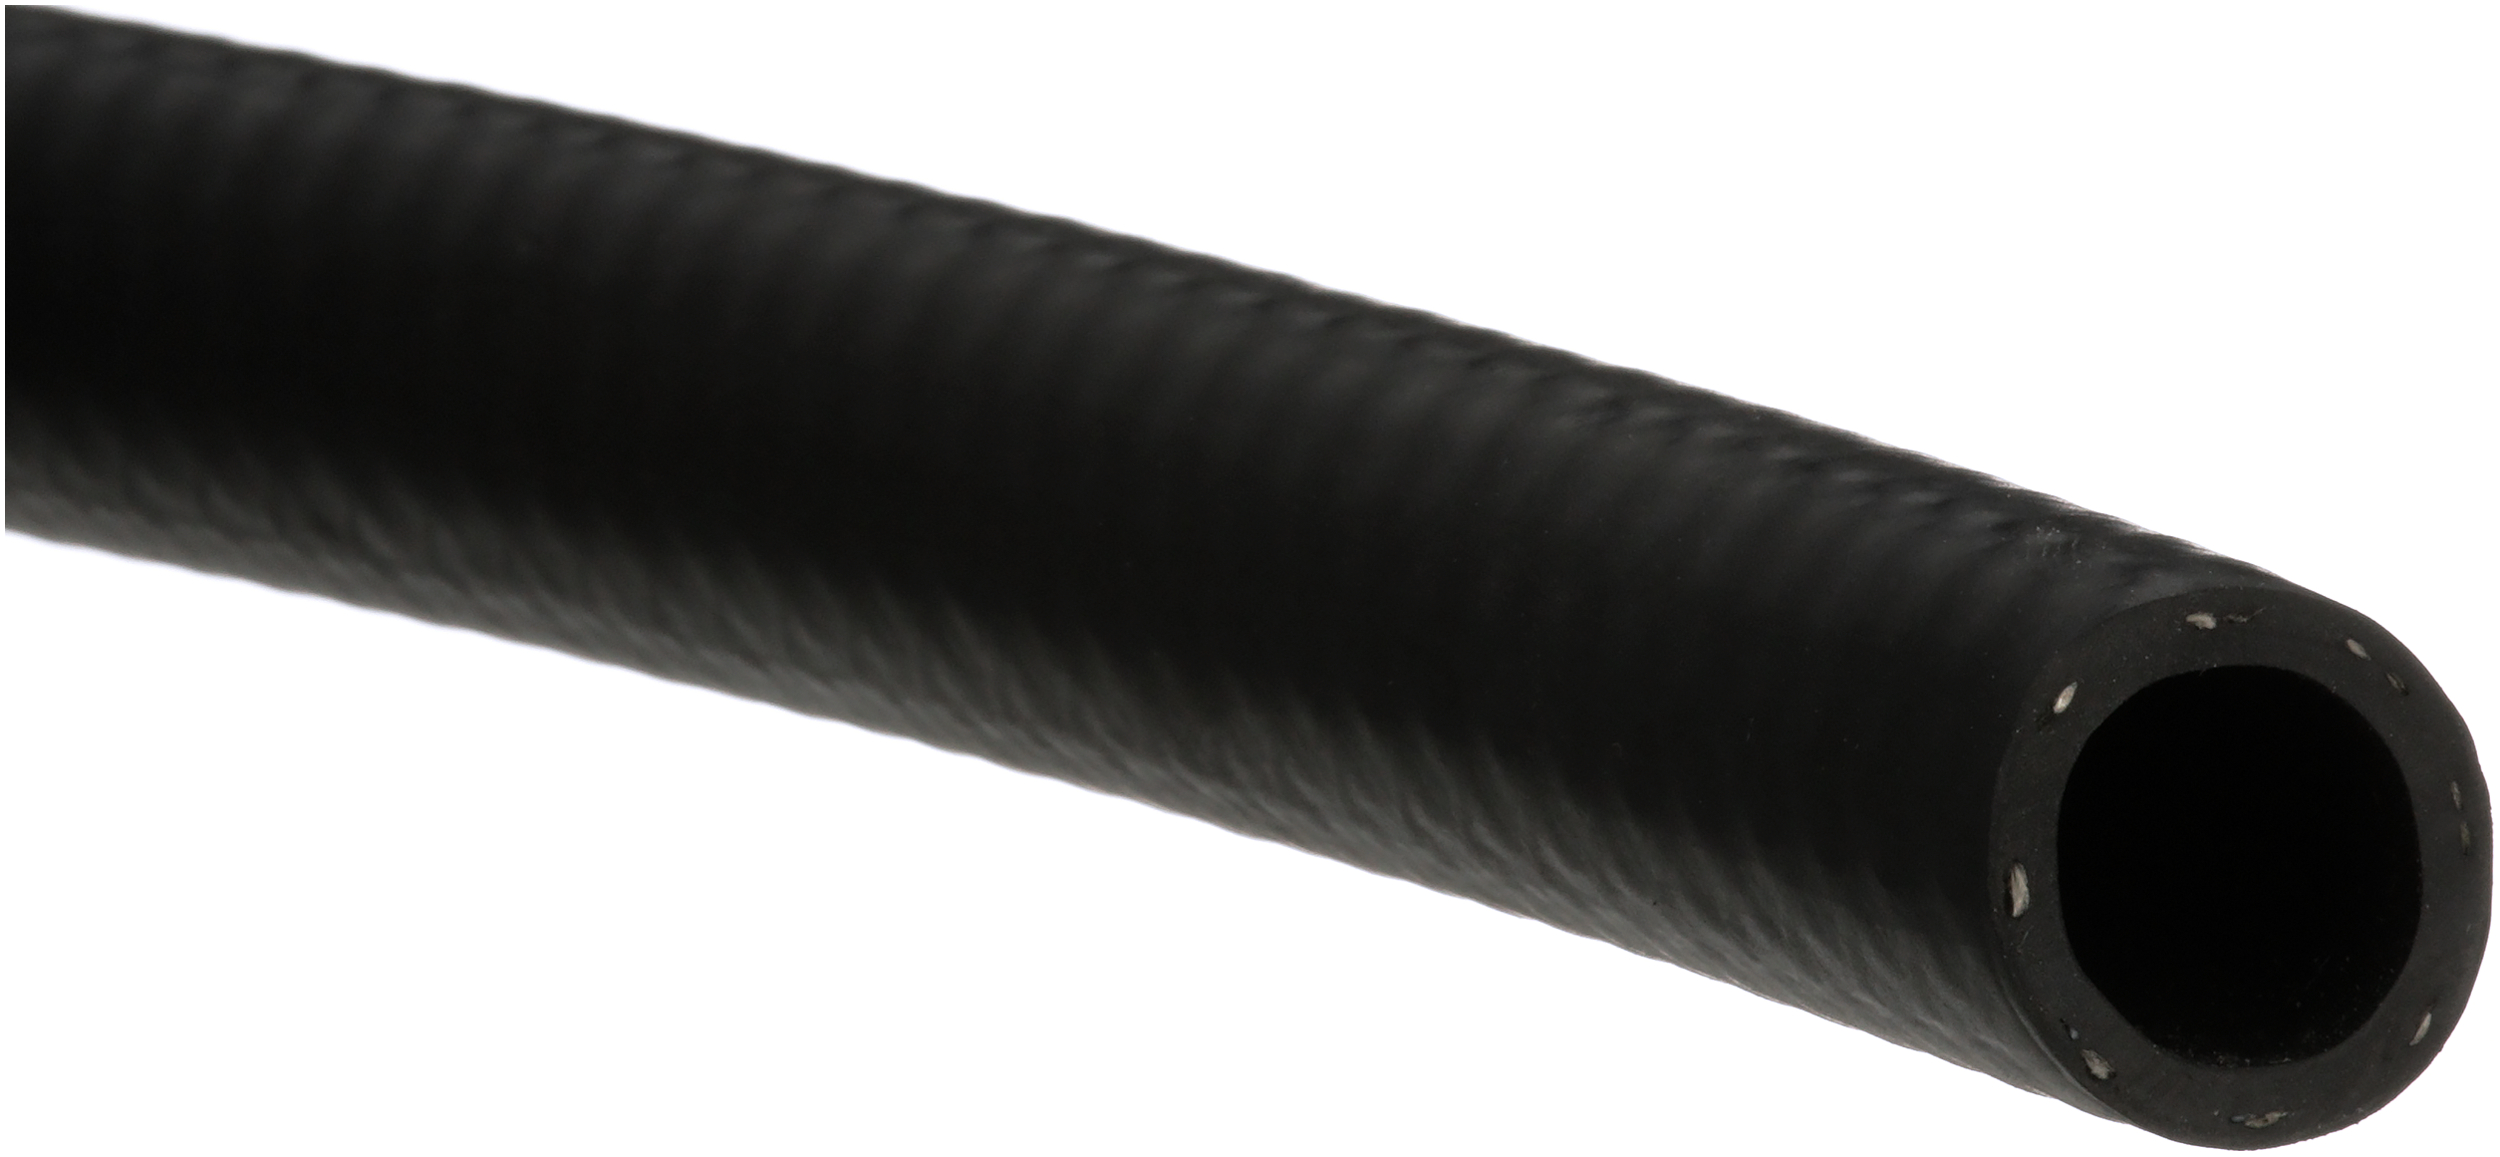 5-ply Hi-Performance Black Silicone Hose Straight Coupler, 3 Long